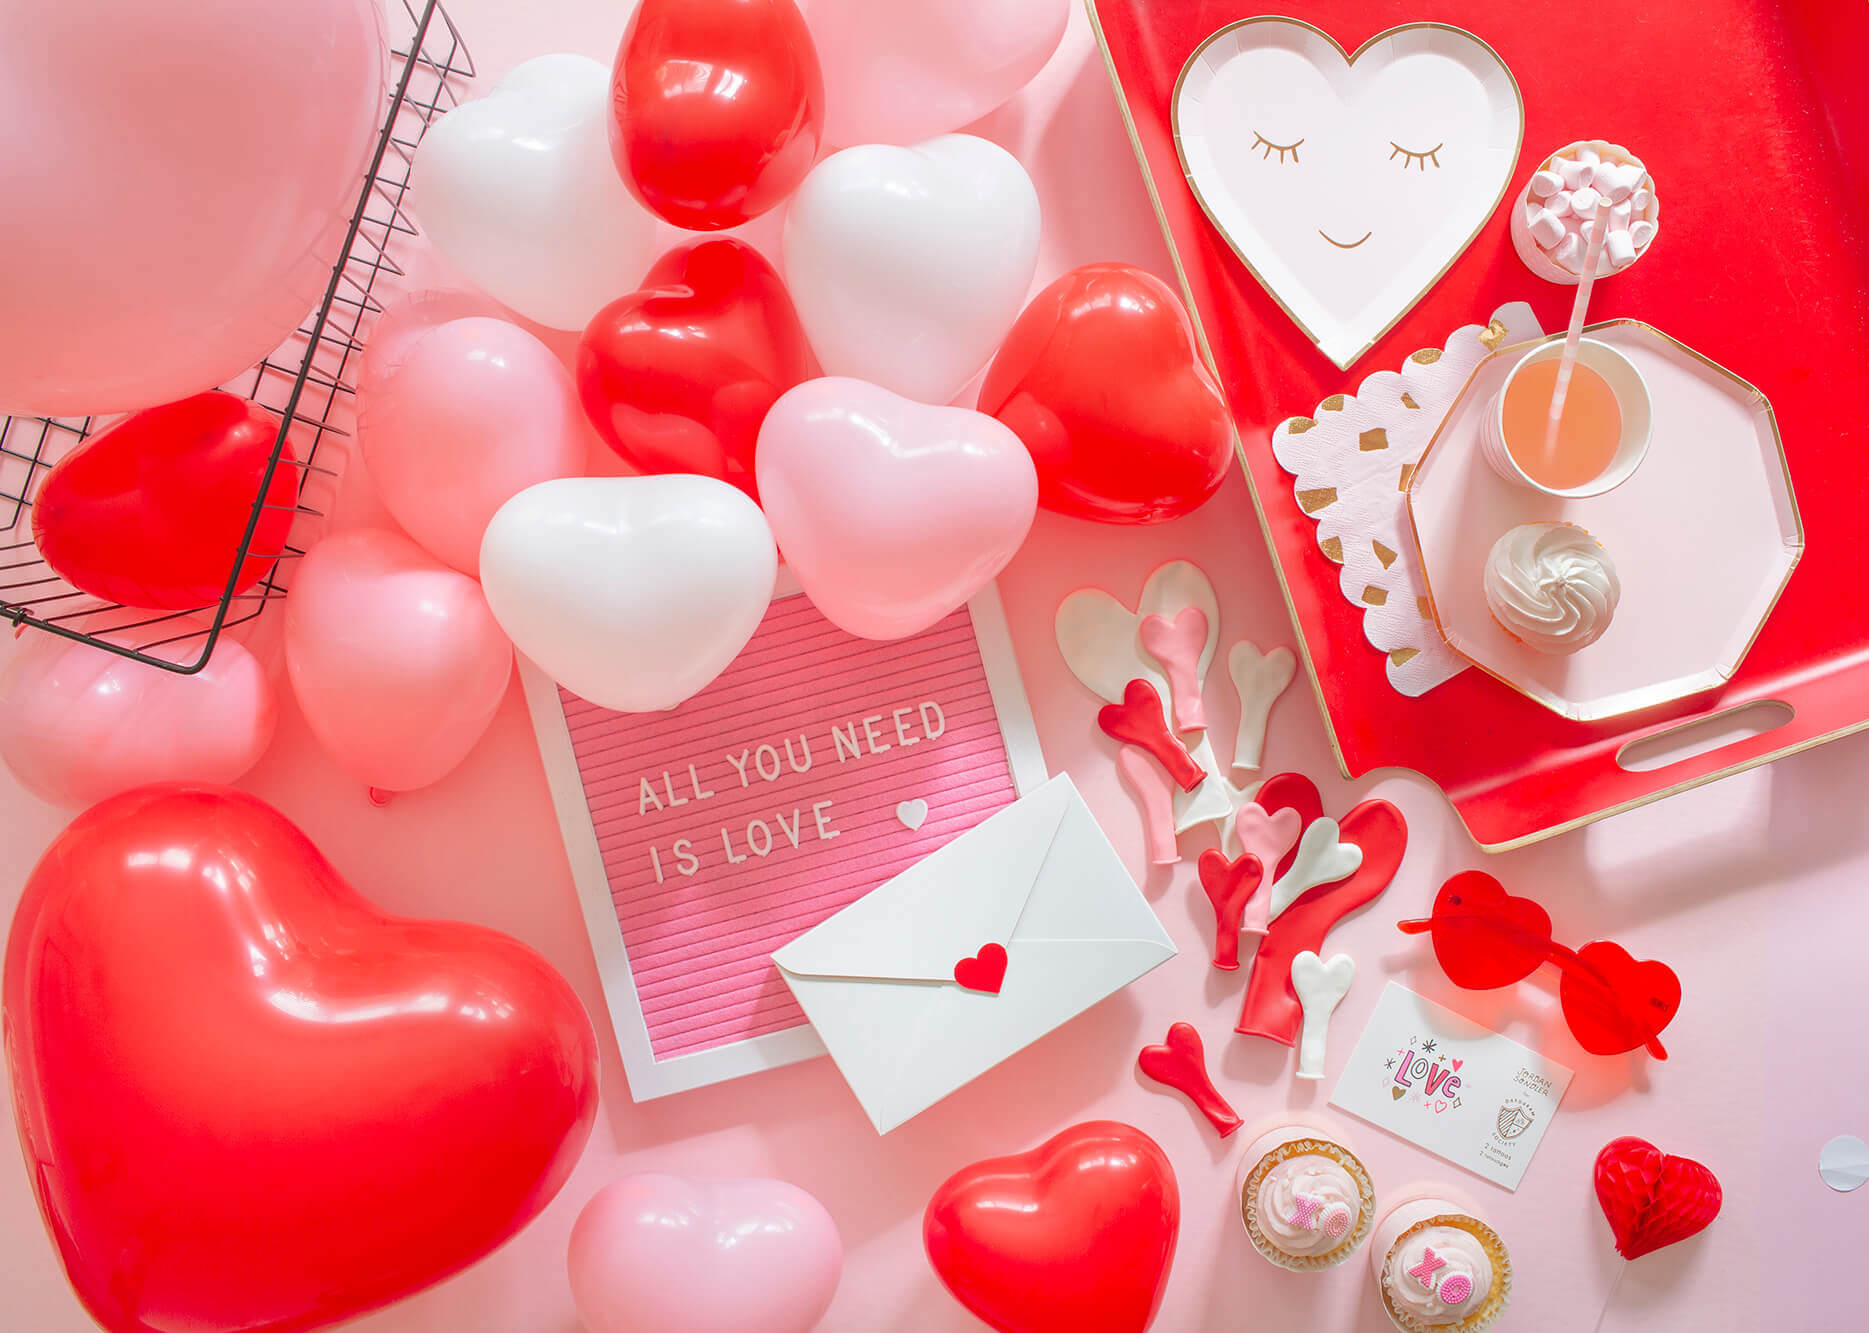 Happy Valentine's Day Card Red Heart Shaped Balloon Sticker